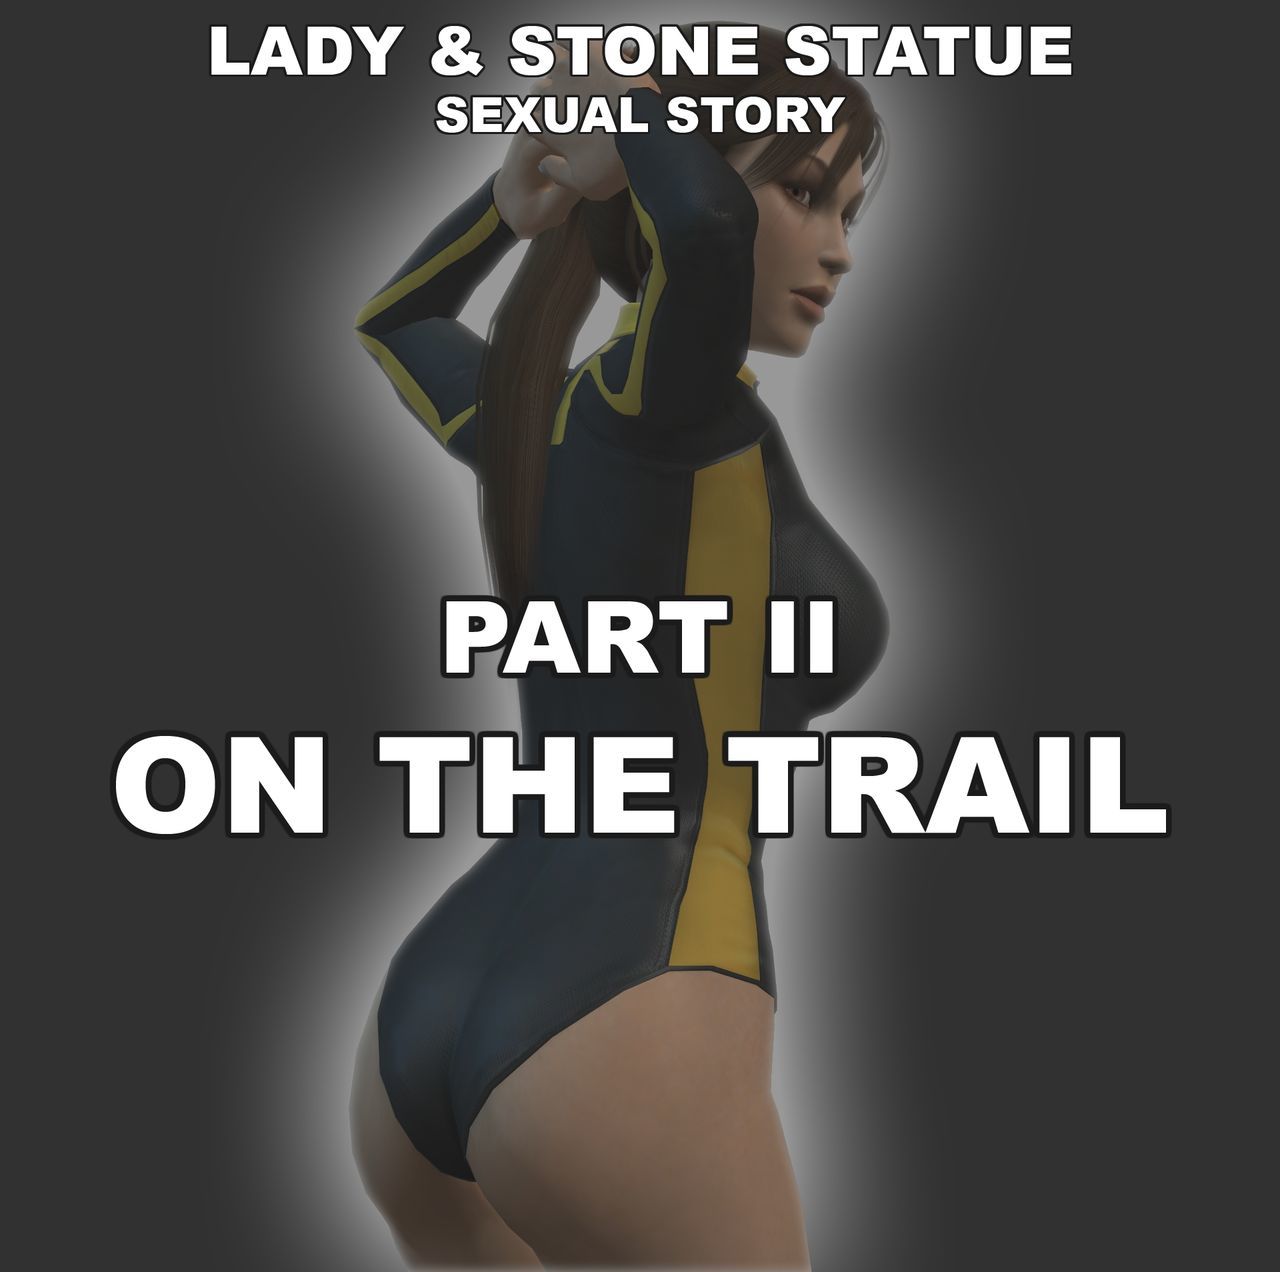 Lady & Stone Statue - Sexual Story Part II of III